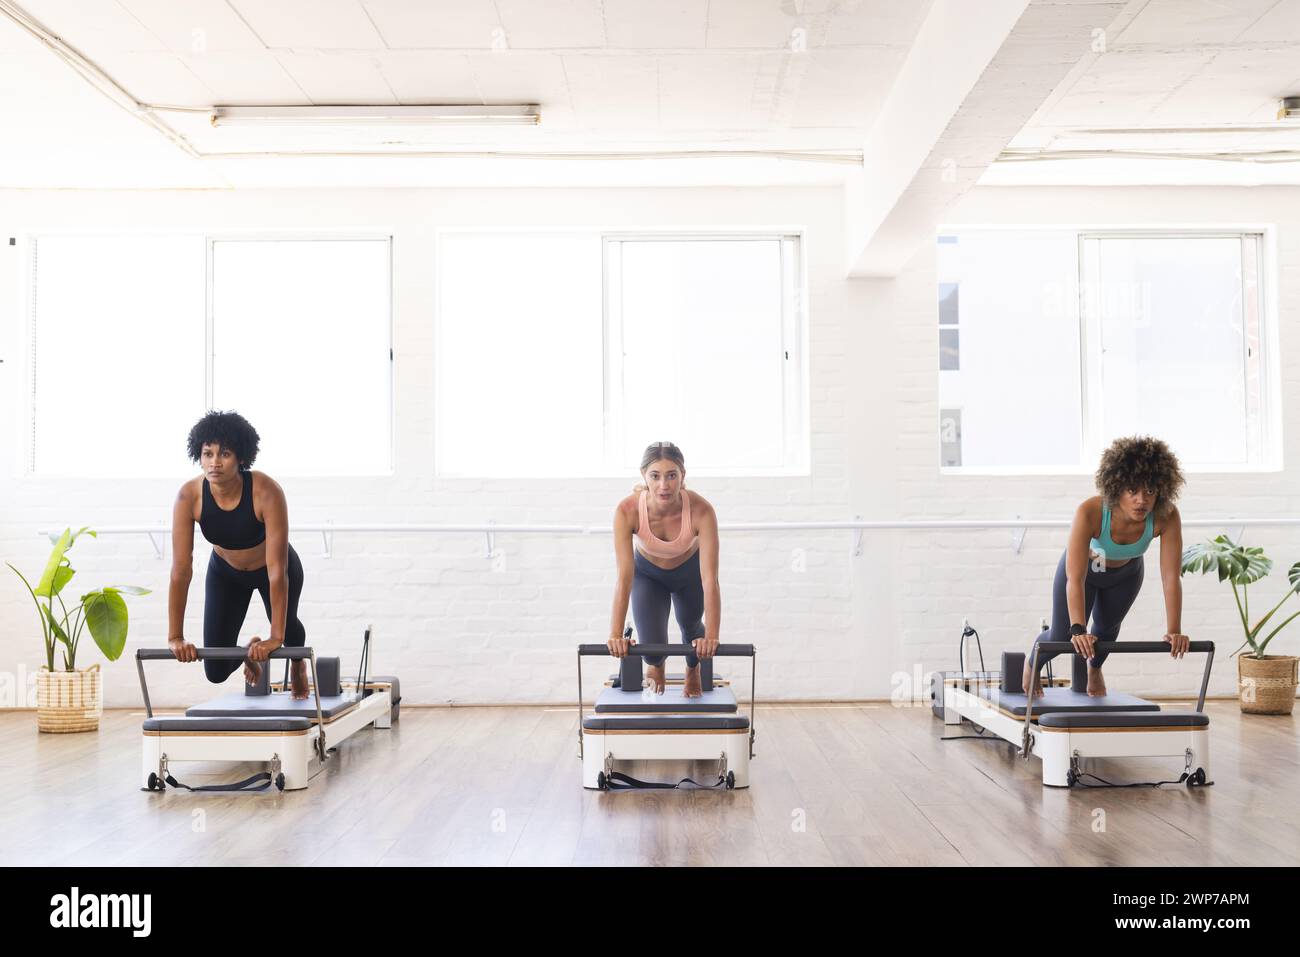 Three women engage in a Pilates workout at a bright studio on reformers Stock Photo